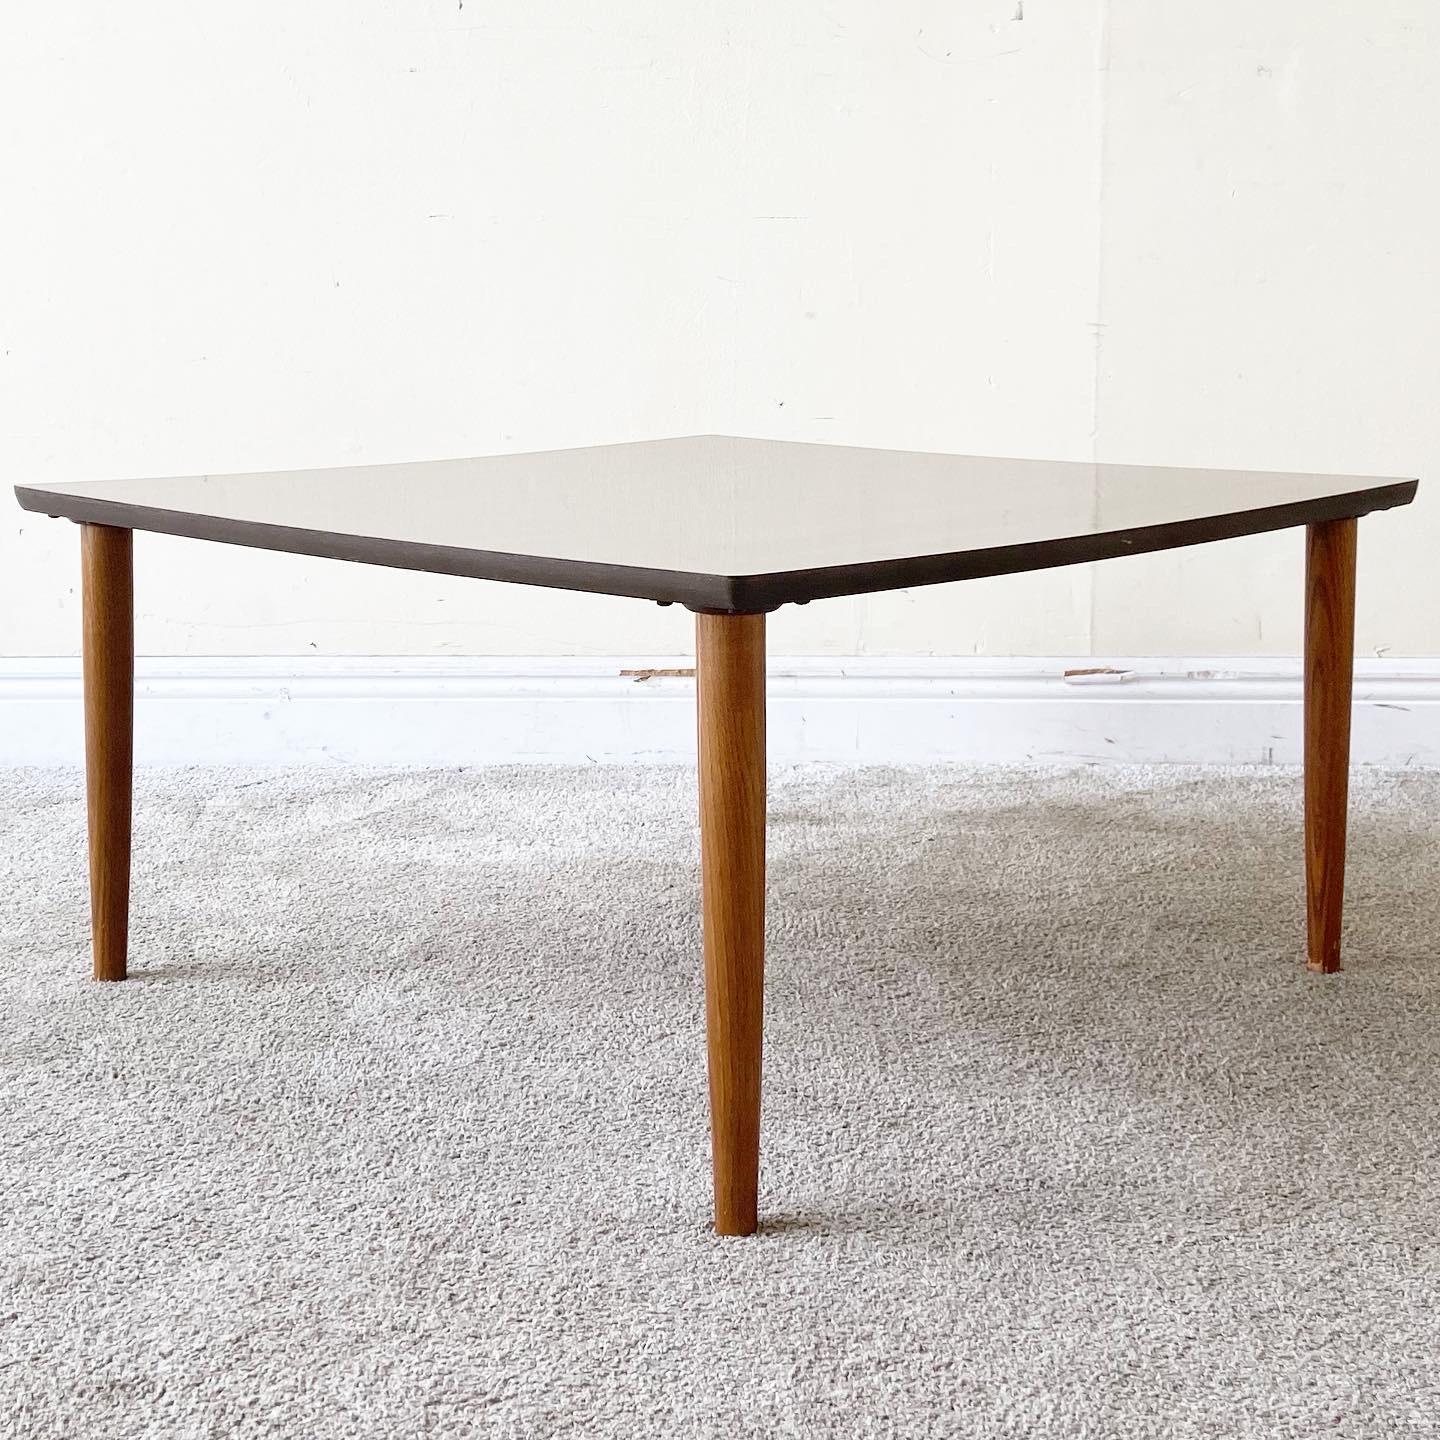 Incredible mid century modern wood coffee table. Features a smooth wood grain laminate top.